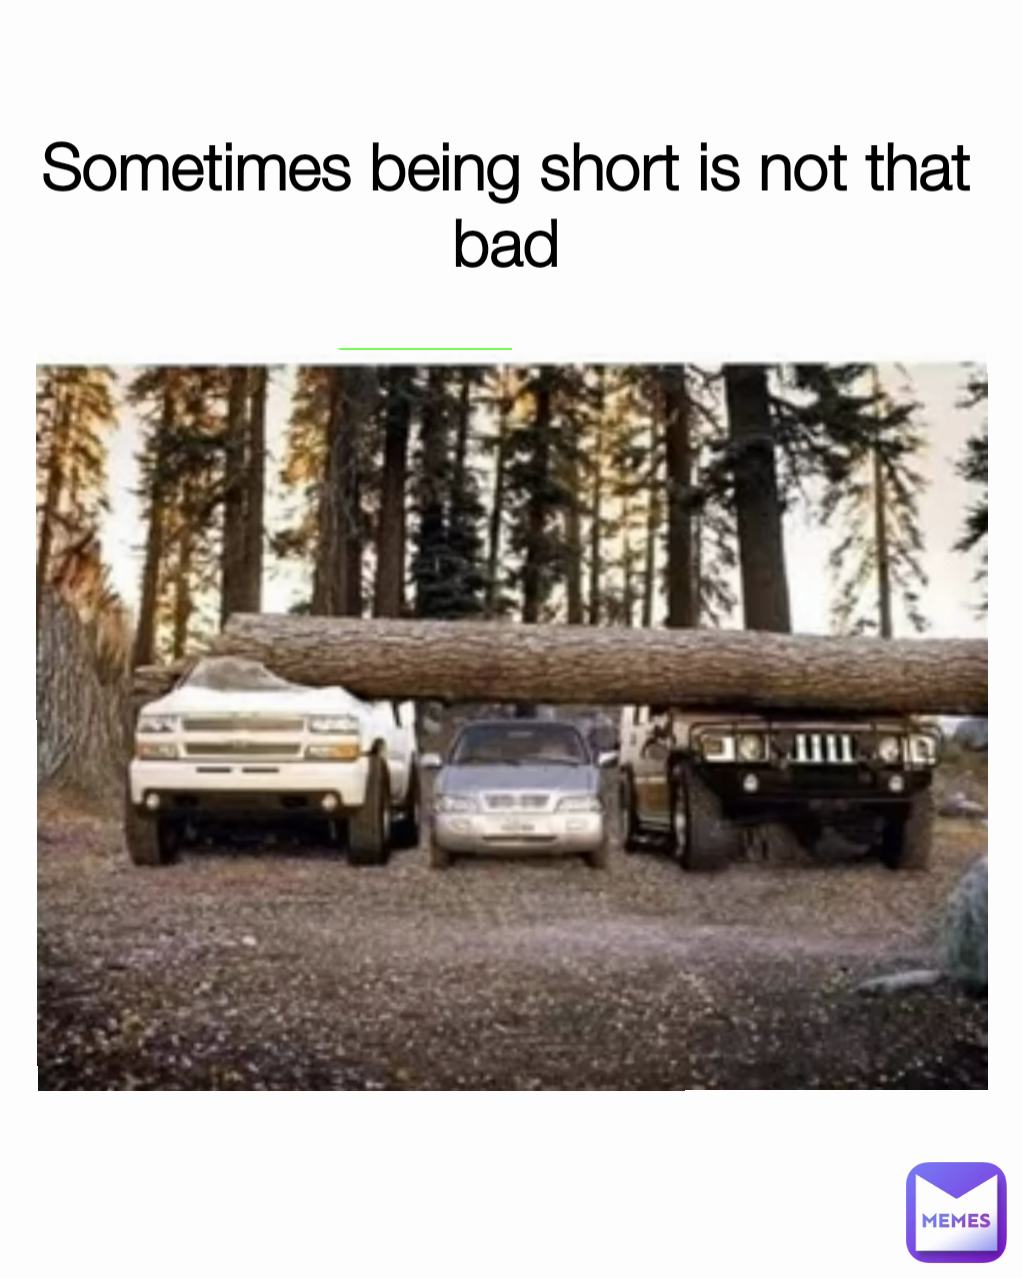 Sometimes being short is not that bad